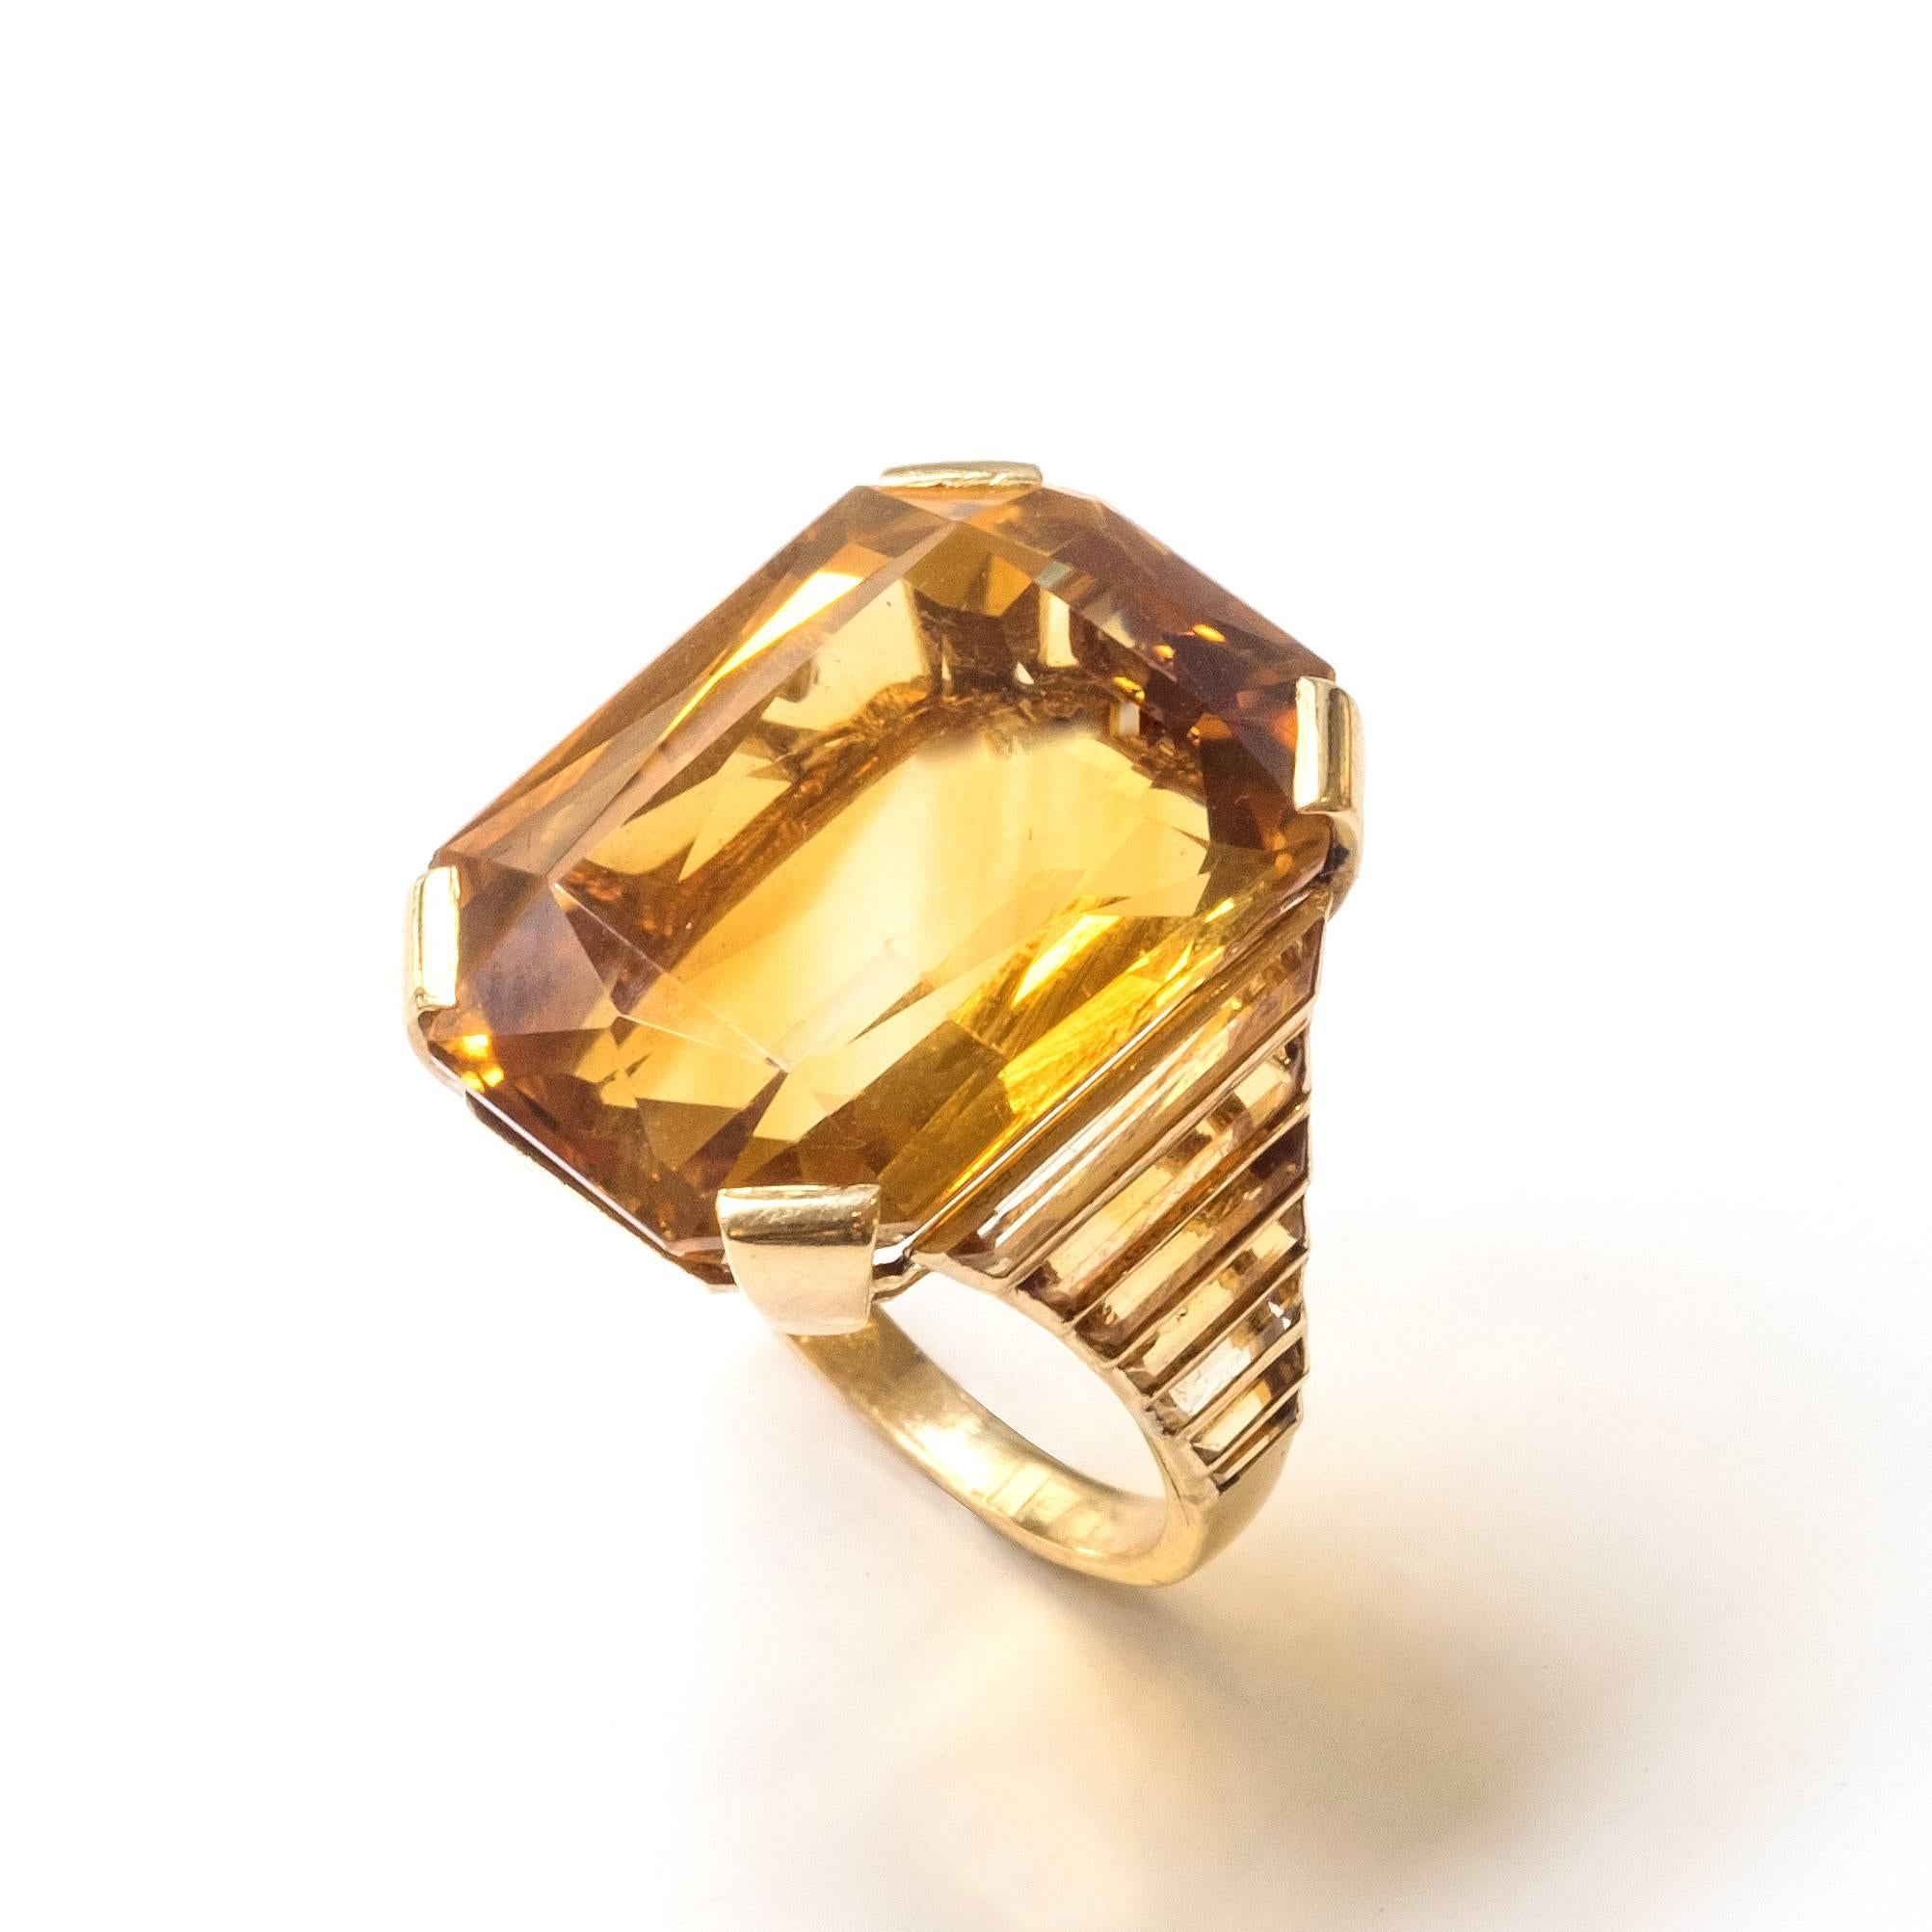 Impressive gold and citrines cocktail ring by Rene Boivin made in 1935. 

Sizes : 
48 1/2 EU  
4 3/4 US

Certificate from Madame Françoise Cailles

René Boivin is a signifiant Parisian designer and engraver. After René’s early death in